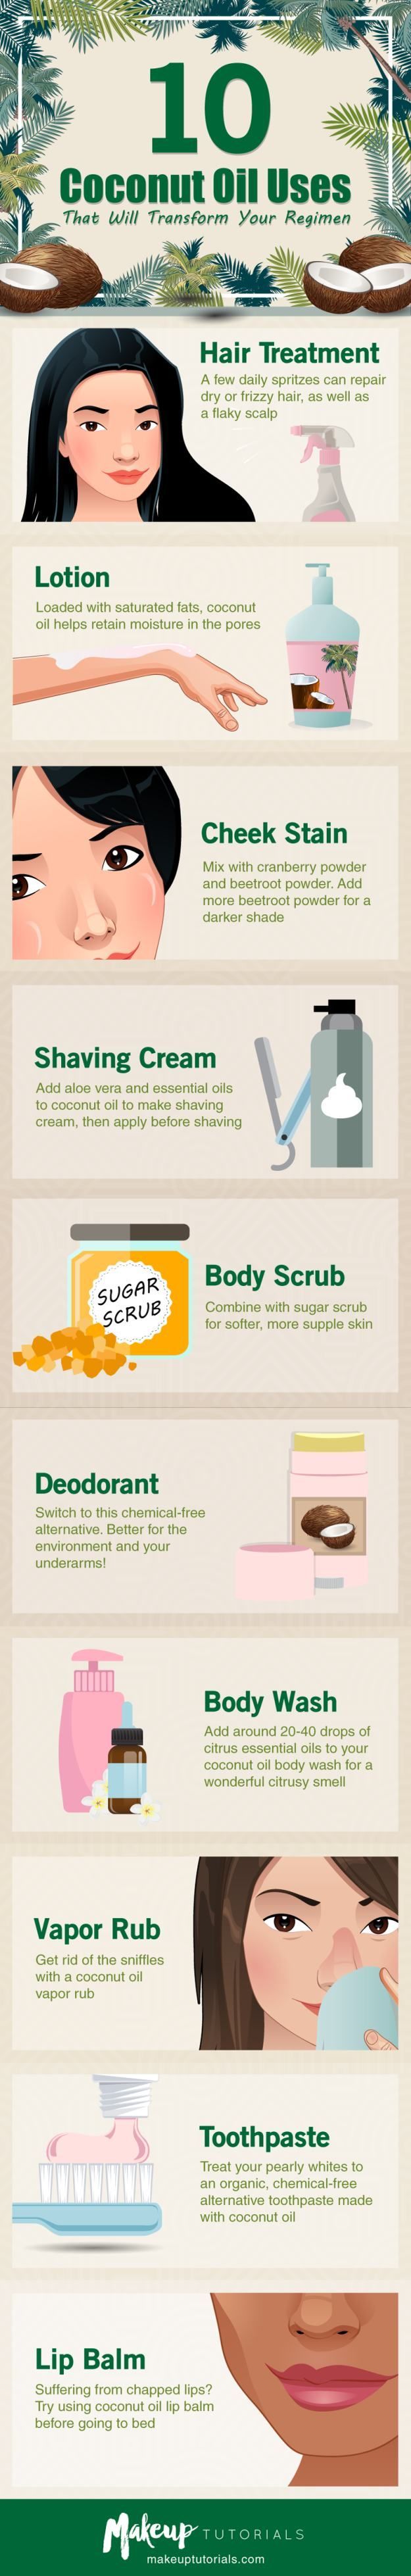 Coconut Oil Uses That Will Transform Your Regimen